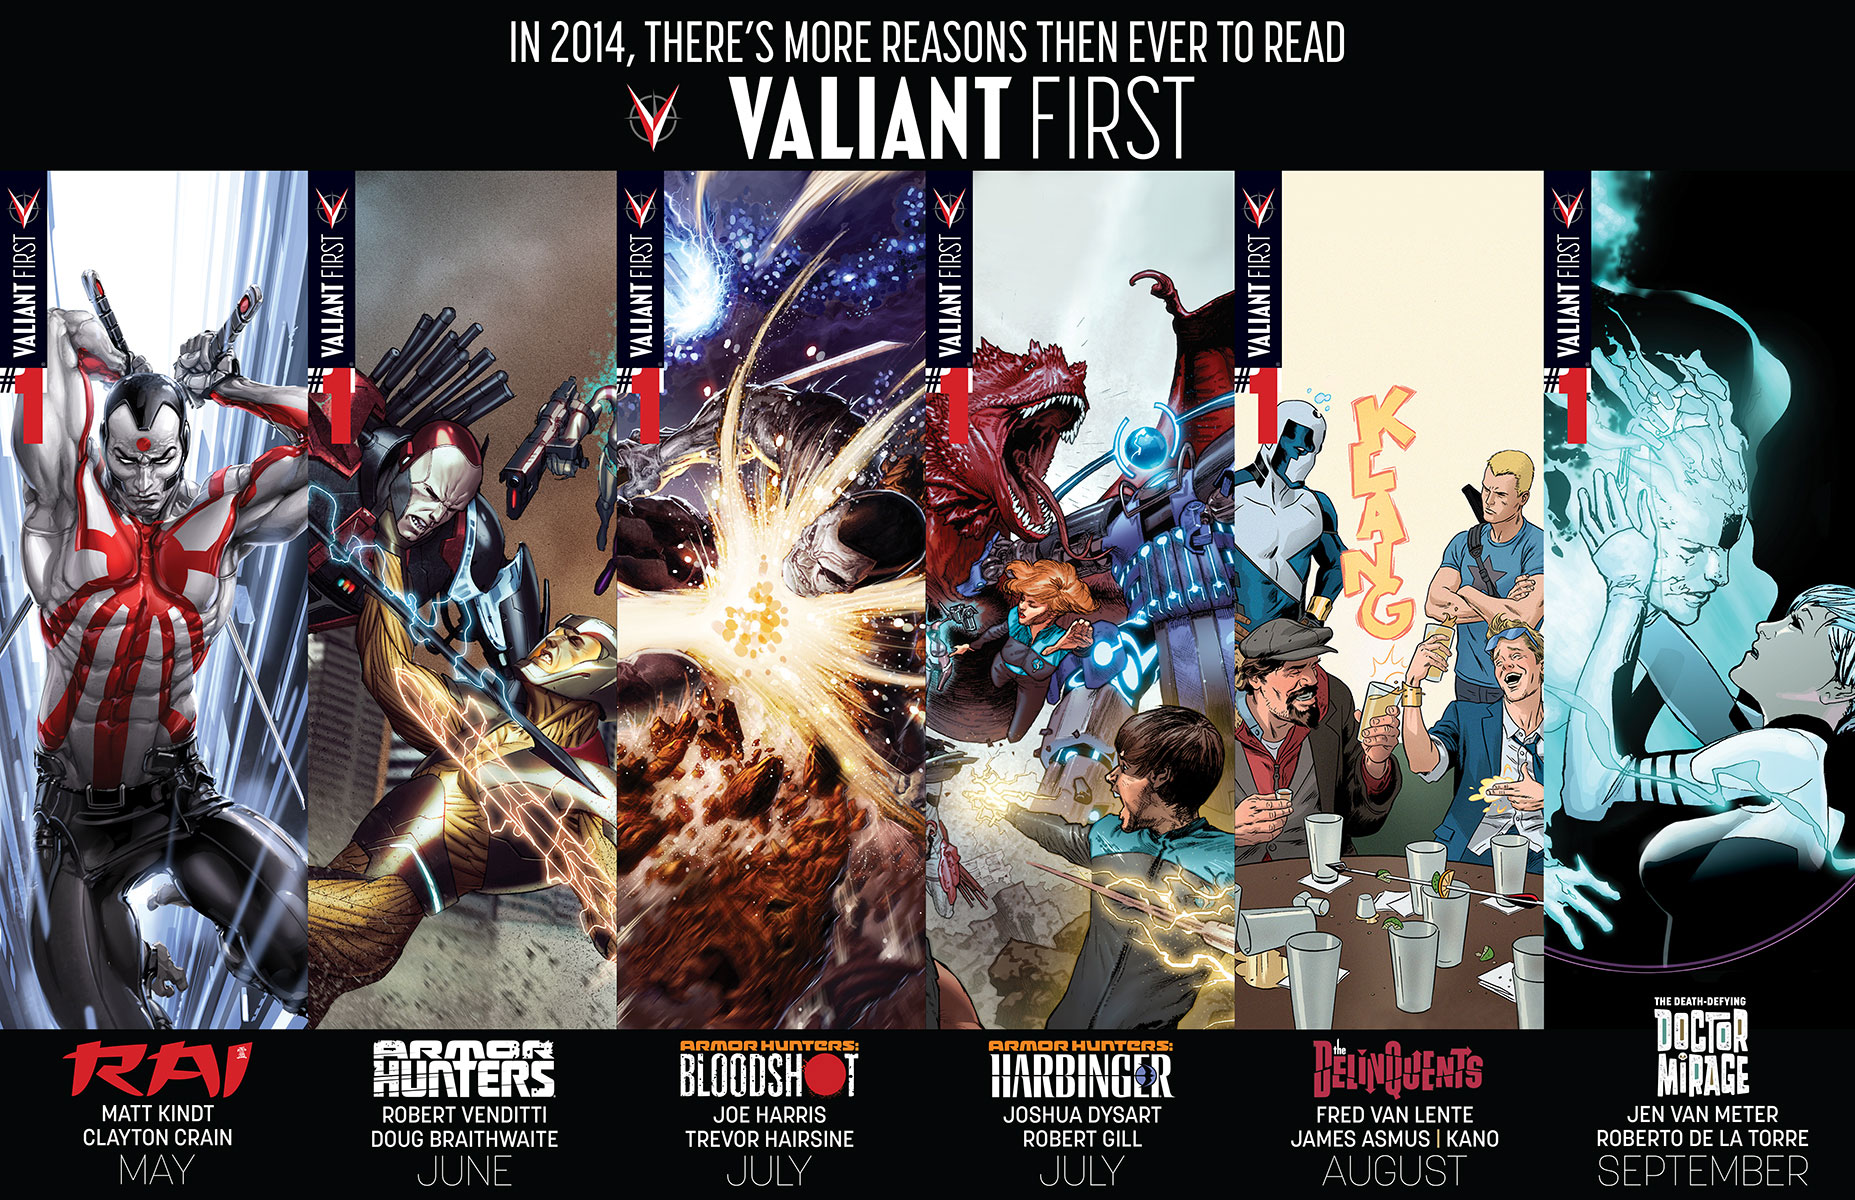 Valiant is back and better than ever in 2014